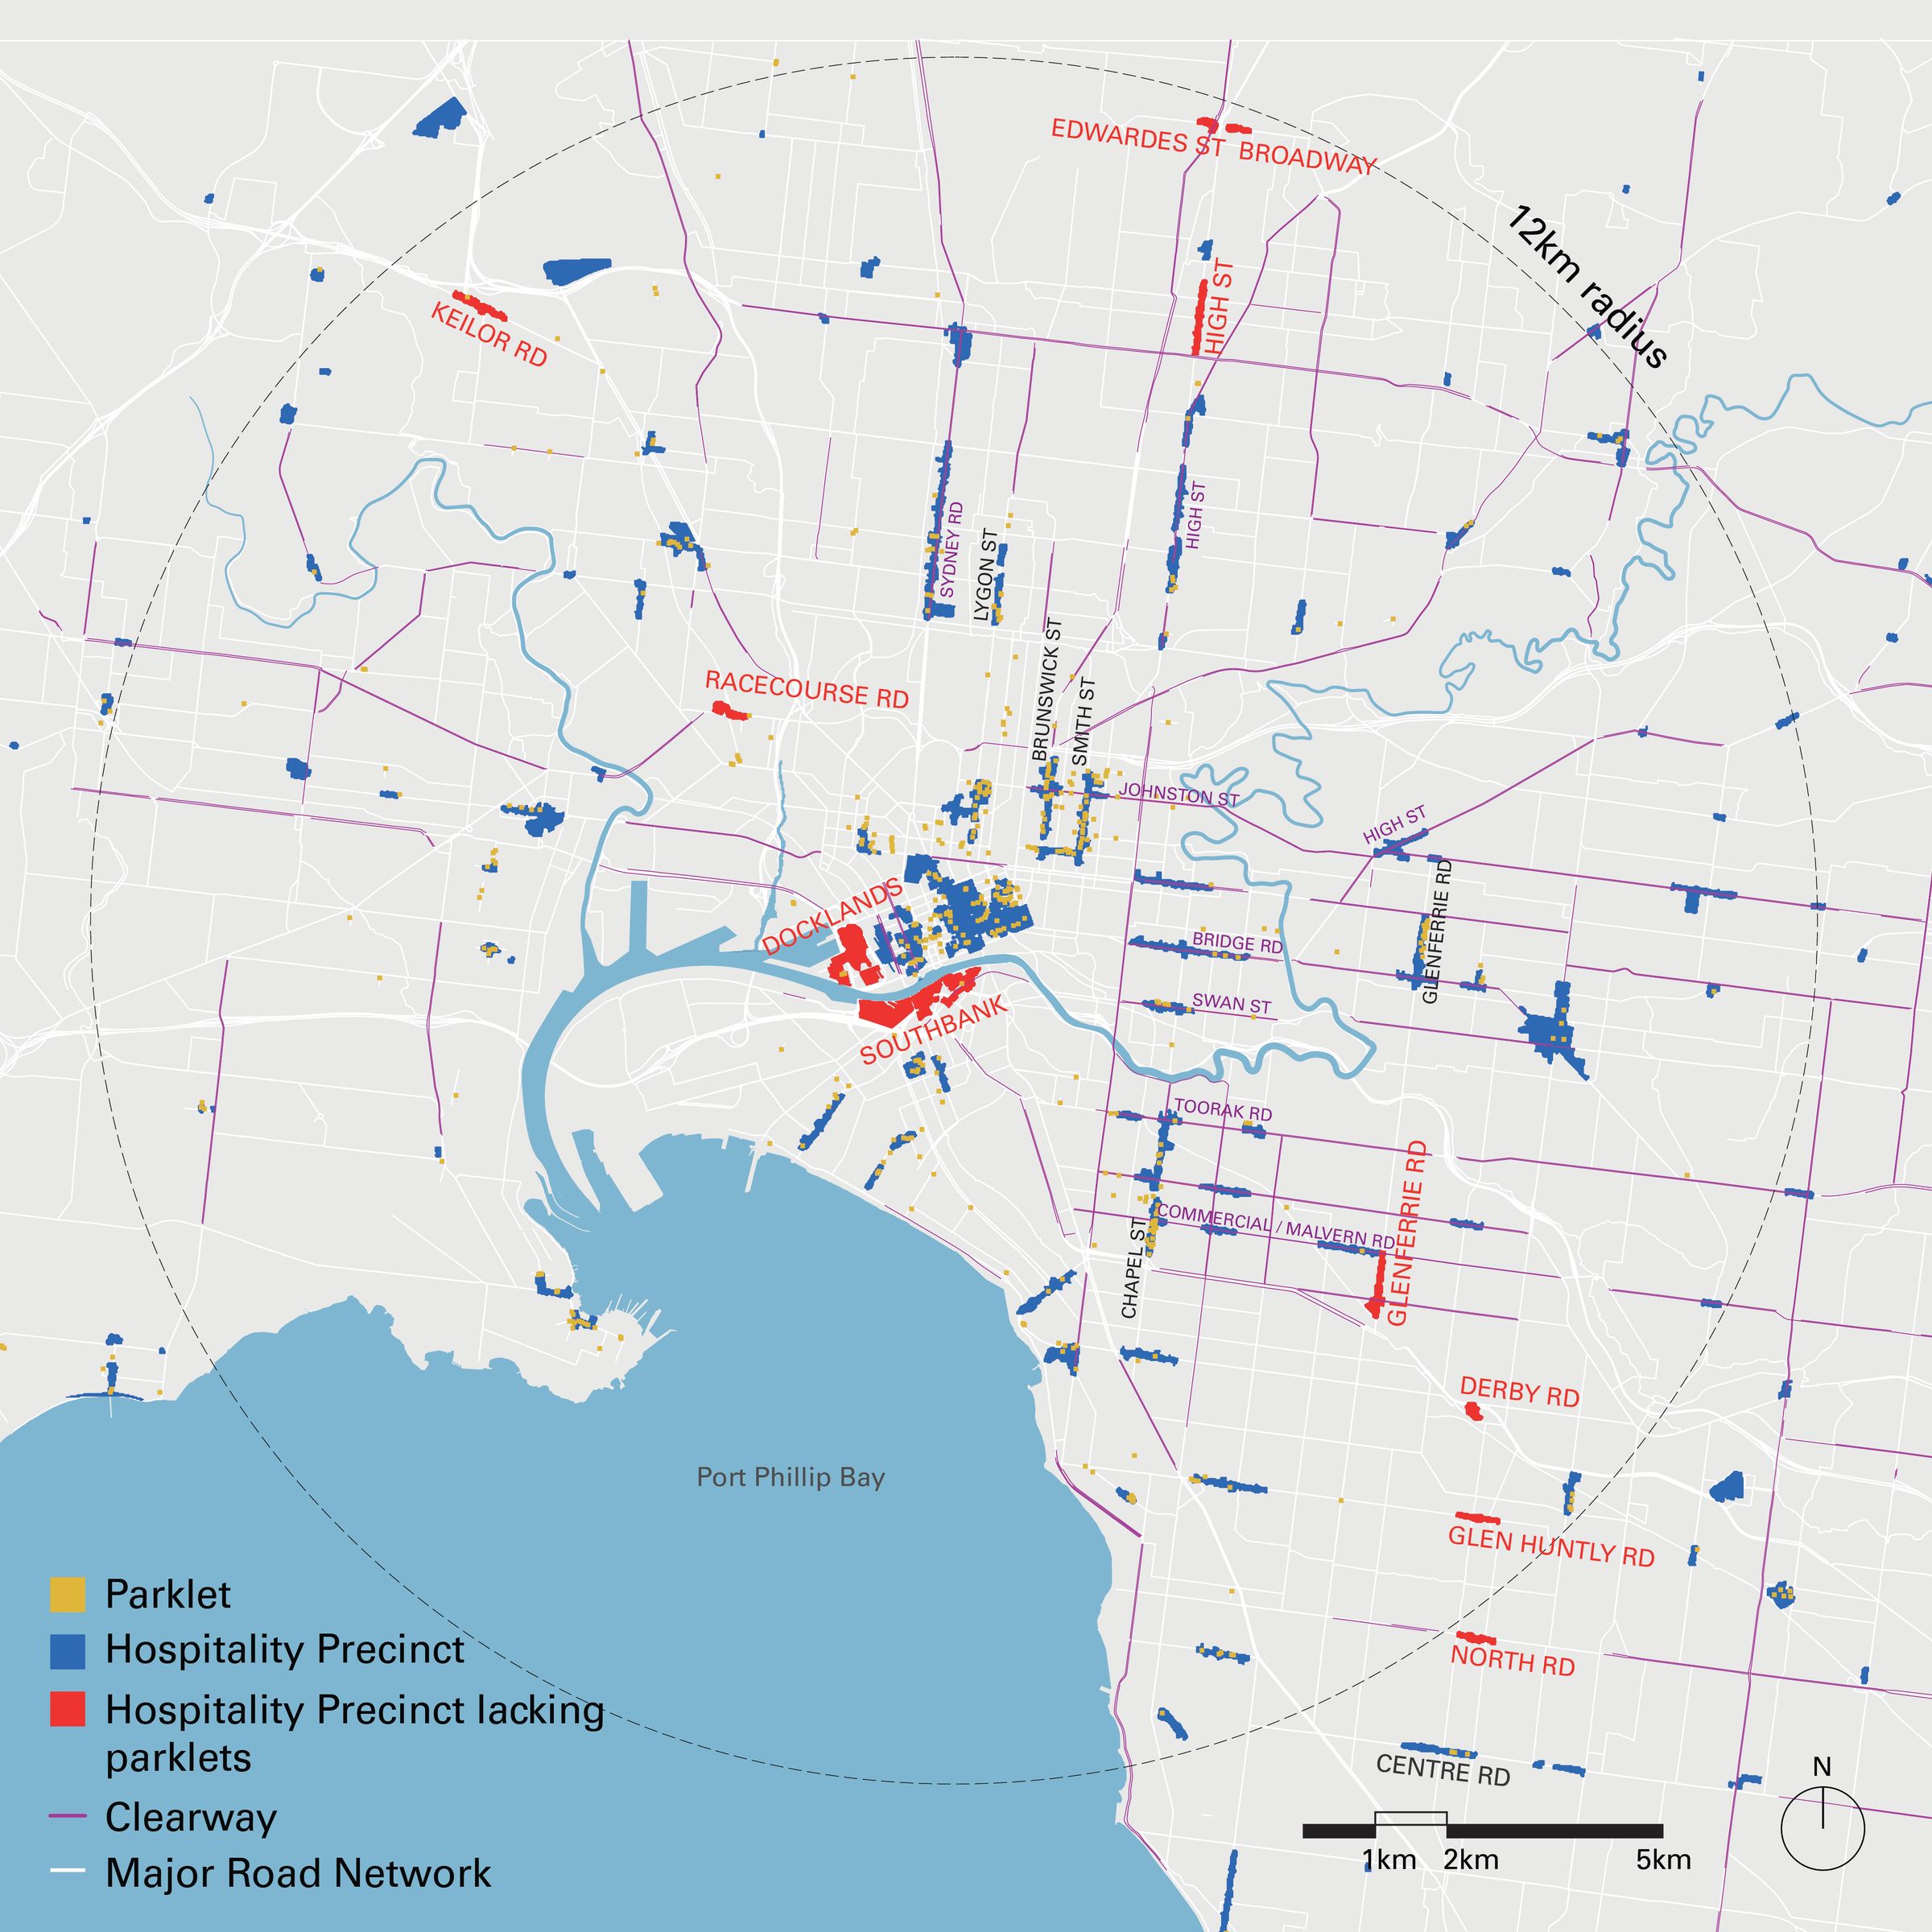 A grey map of inner Melbourne and Port Phillip Bay with a 12km radius label. Hospitality precincts are mapped in blue, parklets in yellow, and hospitality precincts lacking parklets in red and clearways in purple